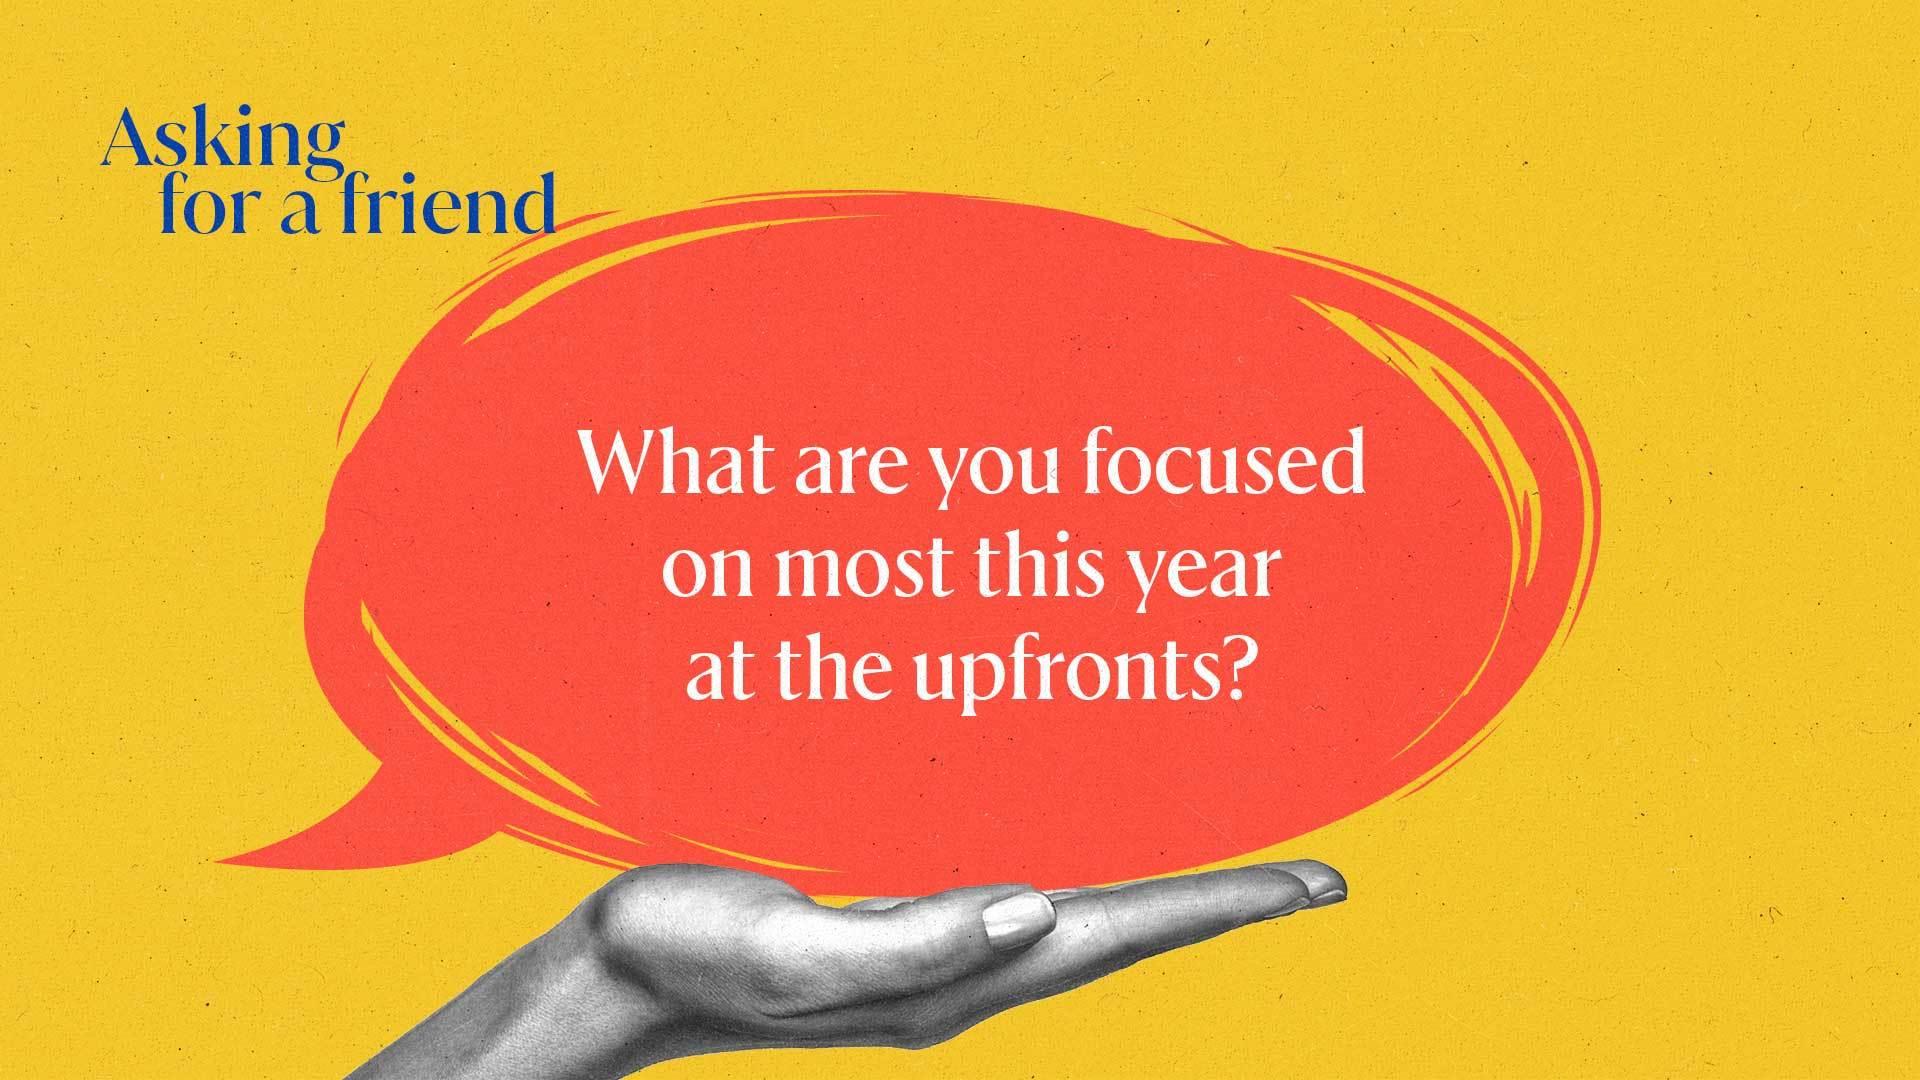 A hand holds up a quote bubble that asks what marketers are most focused on this upfronts